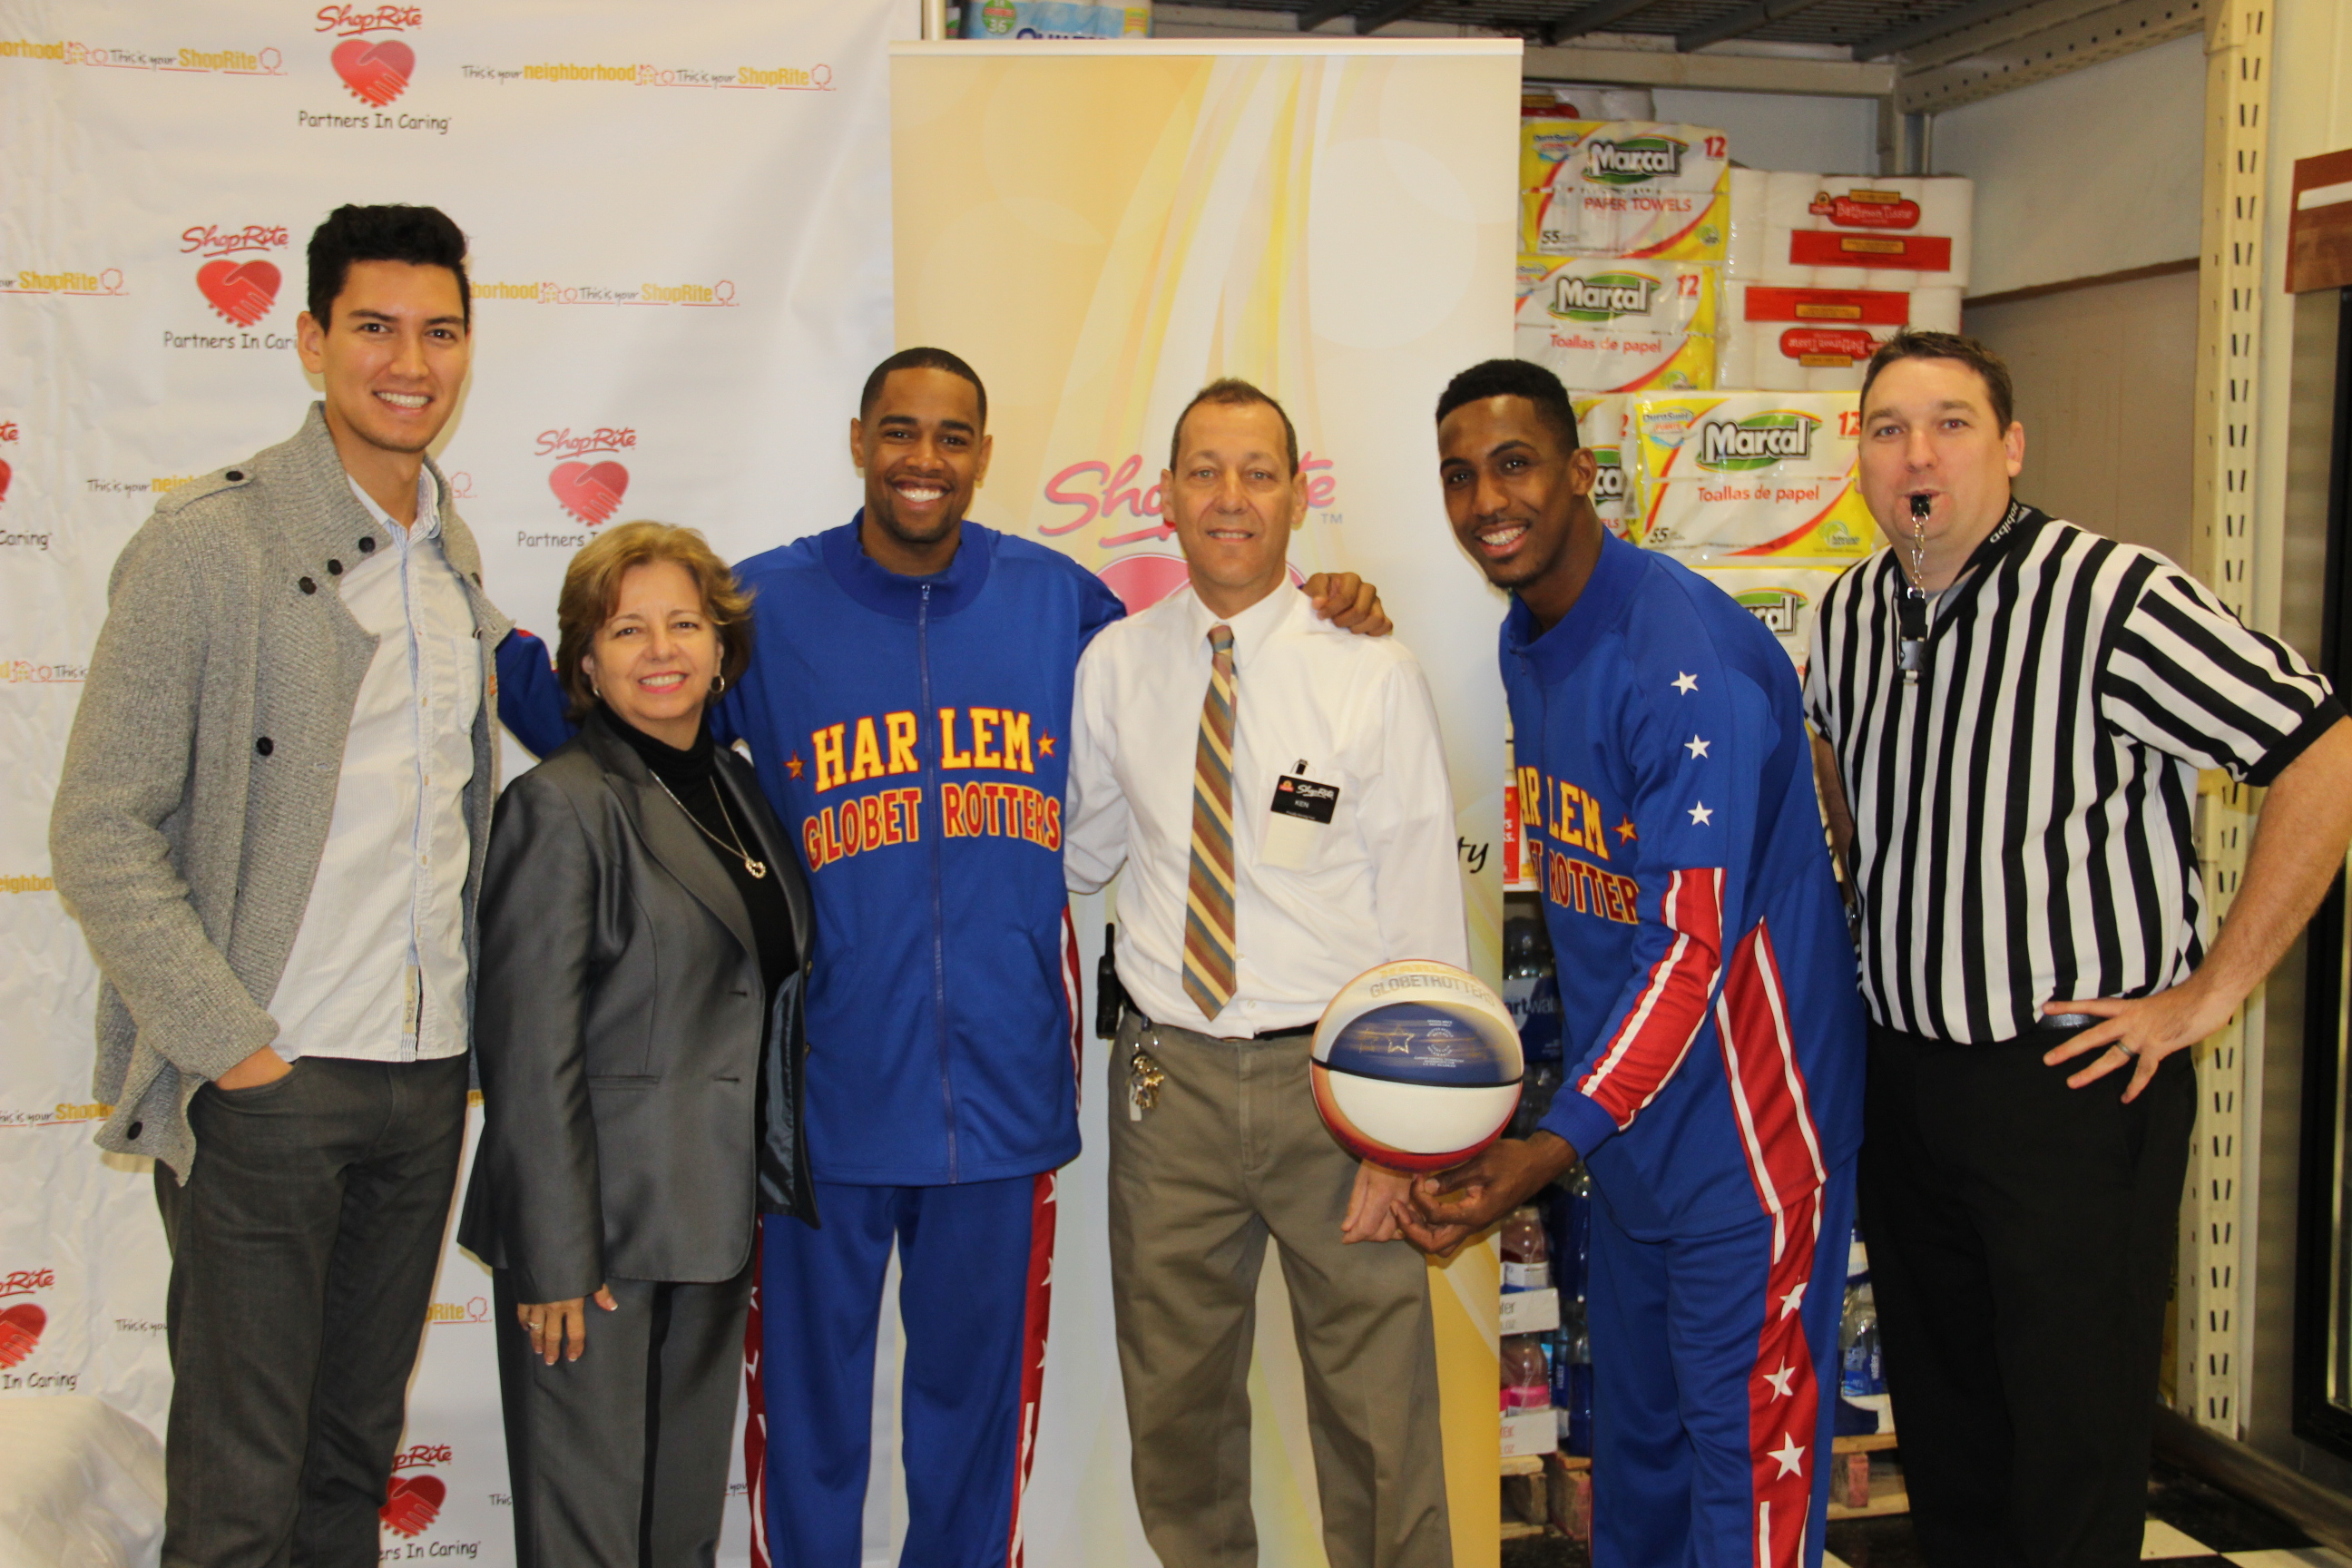 From L to R: Kenji Hoffman, corporate campaigns associate, Food Bank for New York City, Chris Magyarits, community relations manager, ShopRite, Cheese Chisholm, guard, Harlem Globetrotters, Ken Grillo, assistant manager, ShopRite of Forest and Richmond, Bull Bullard, guard, Harlem Globetrotters, Steve Hildner, community relations advocate for ShopRite.   